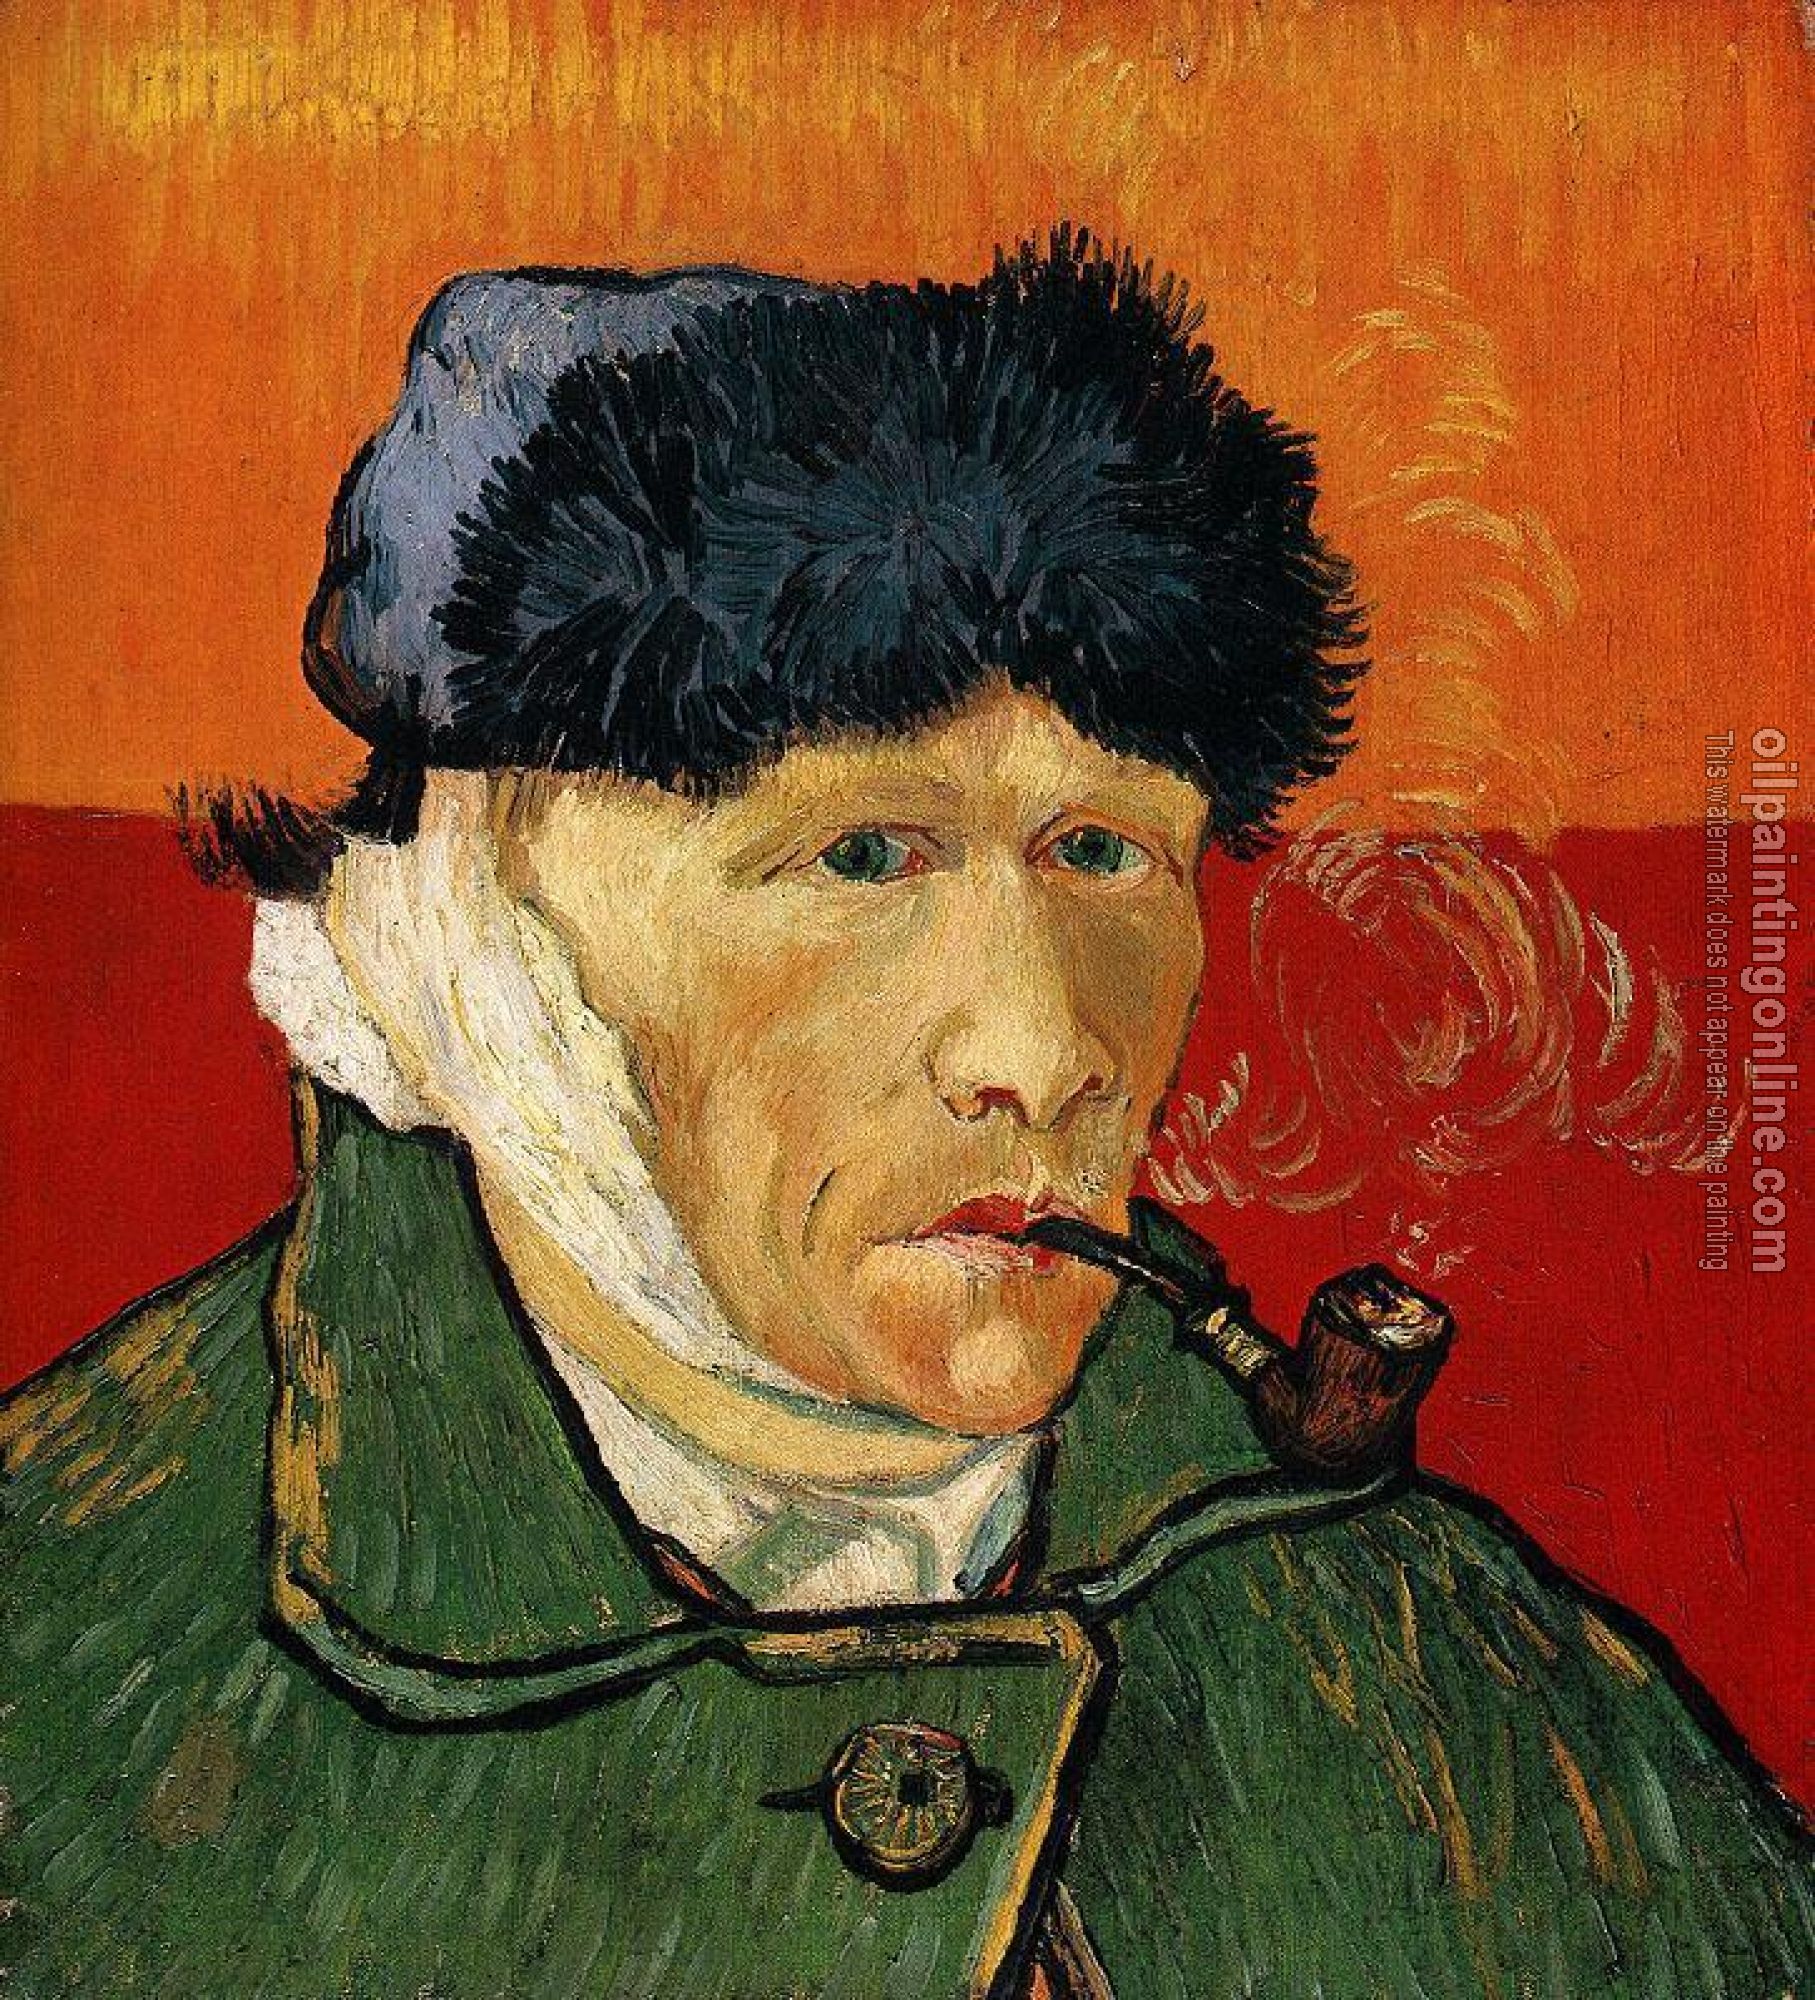 Gogh, Vincent van - Self Portrait with Bandaged Ear and Pipe